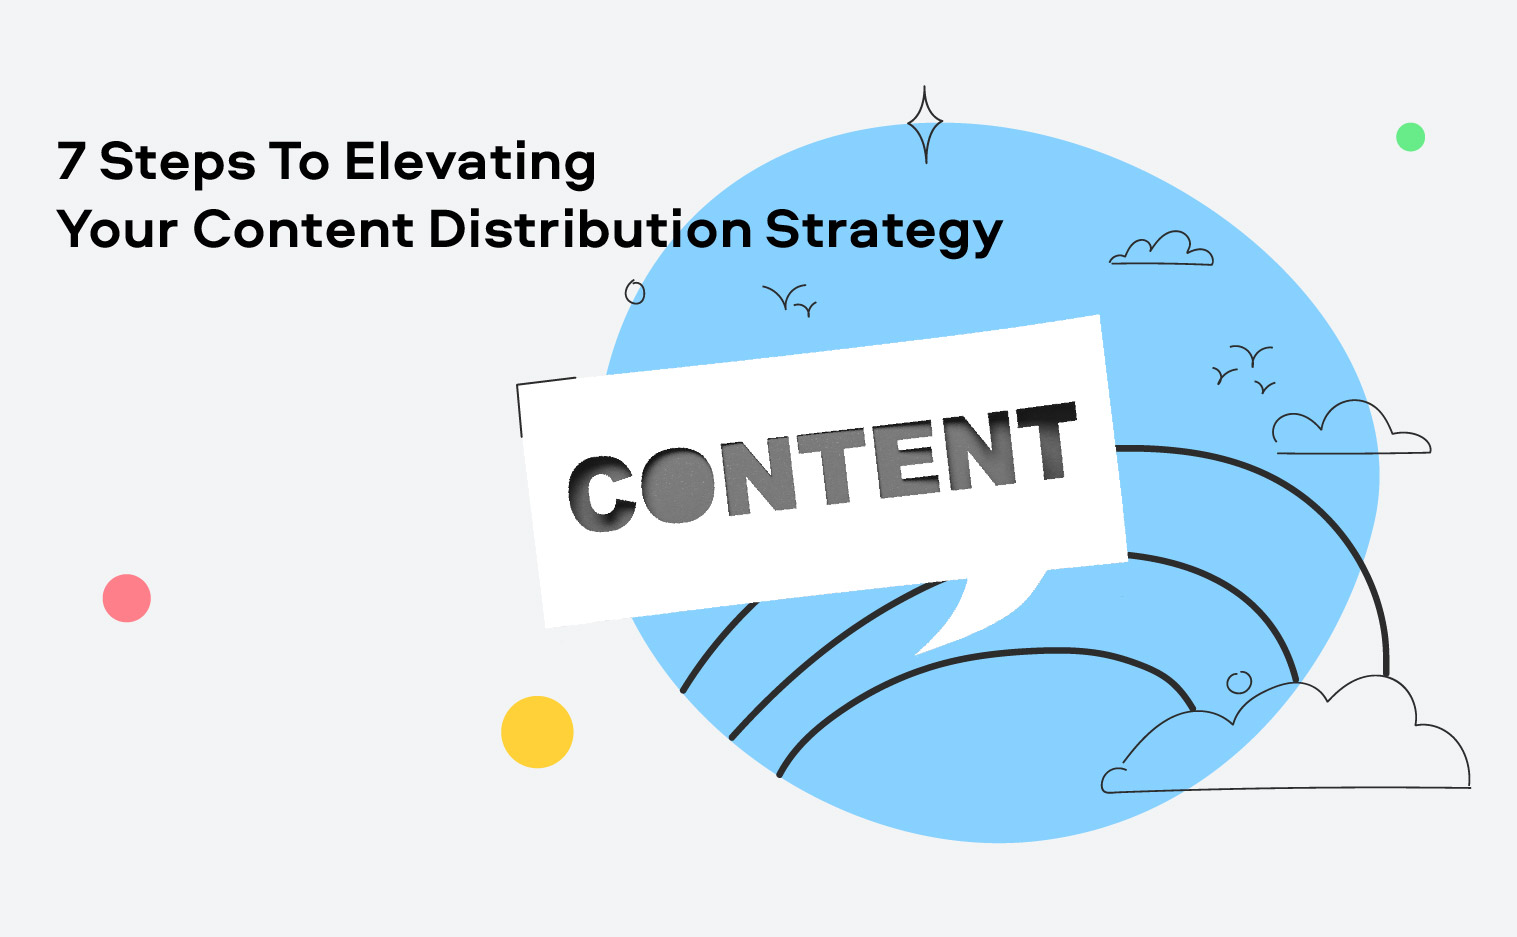 7 Steps To Elevating Your Content Distribution Strategy